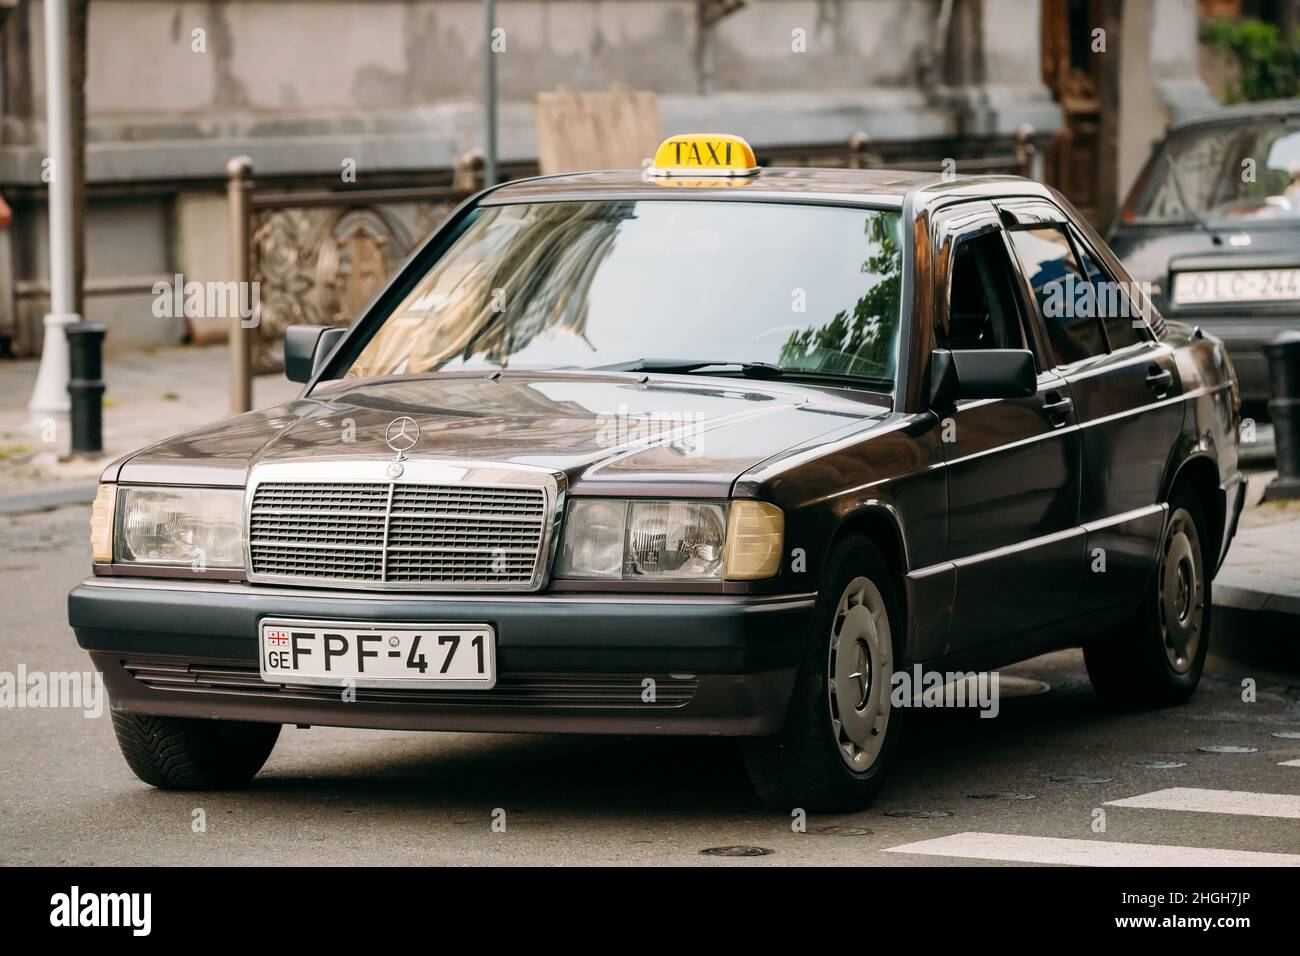 Old car 1996 Mercedes-Benz 190 E (W201) sedan parking on street. First compact executive car from Mercedes-Benz introduced in 1982, positioned below Stock Photo